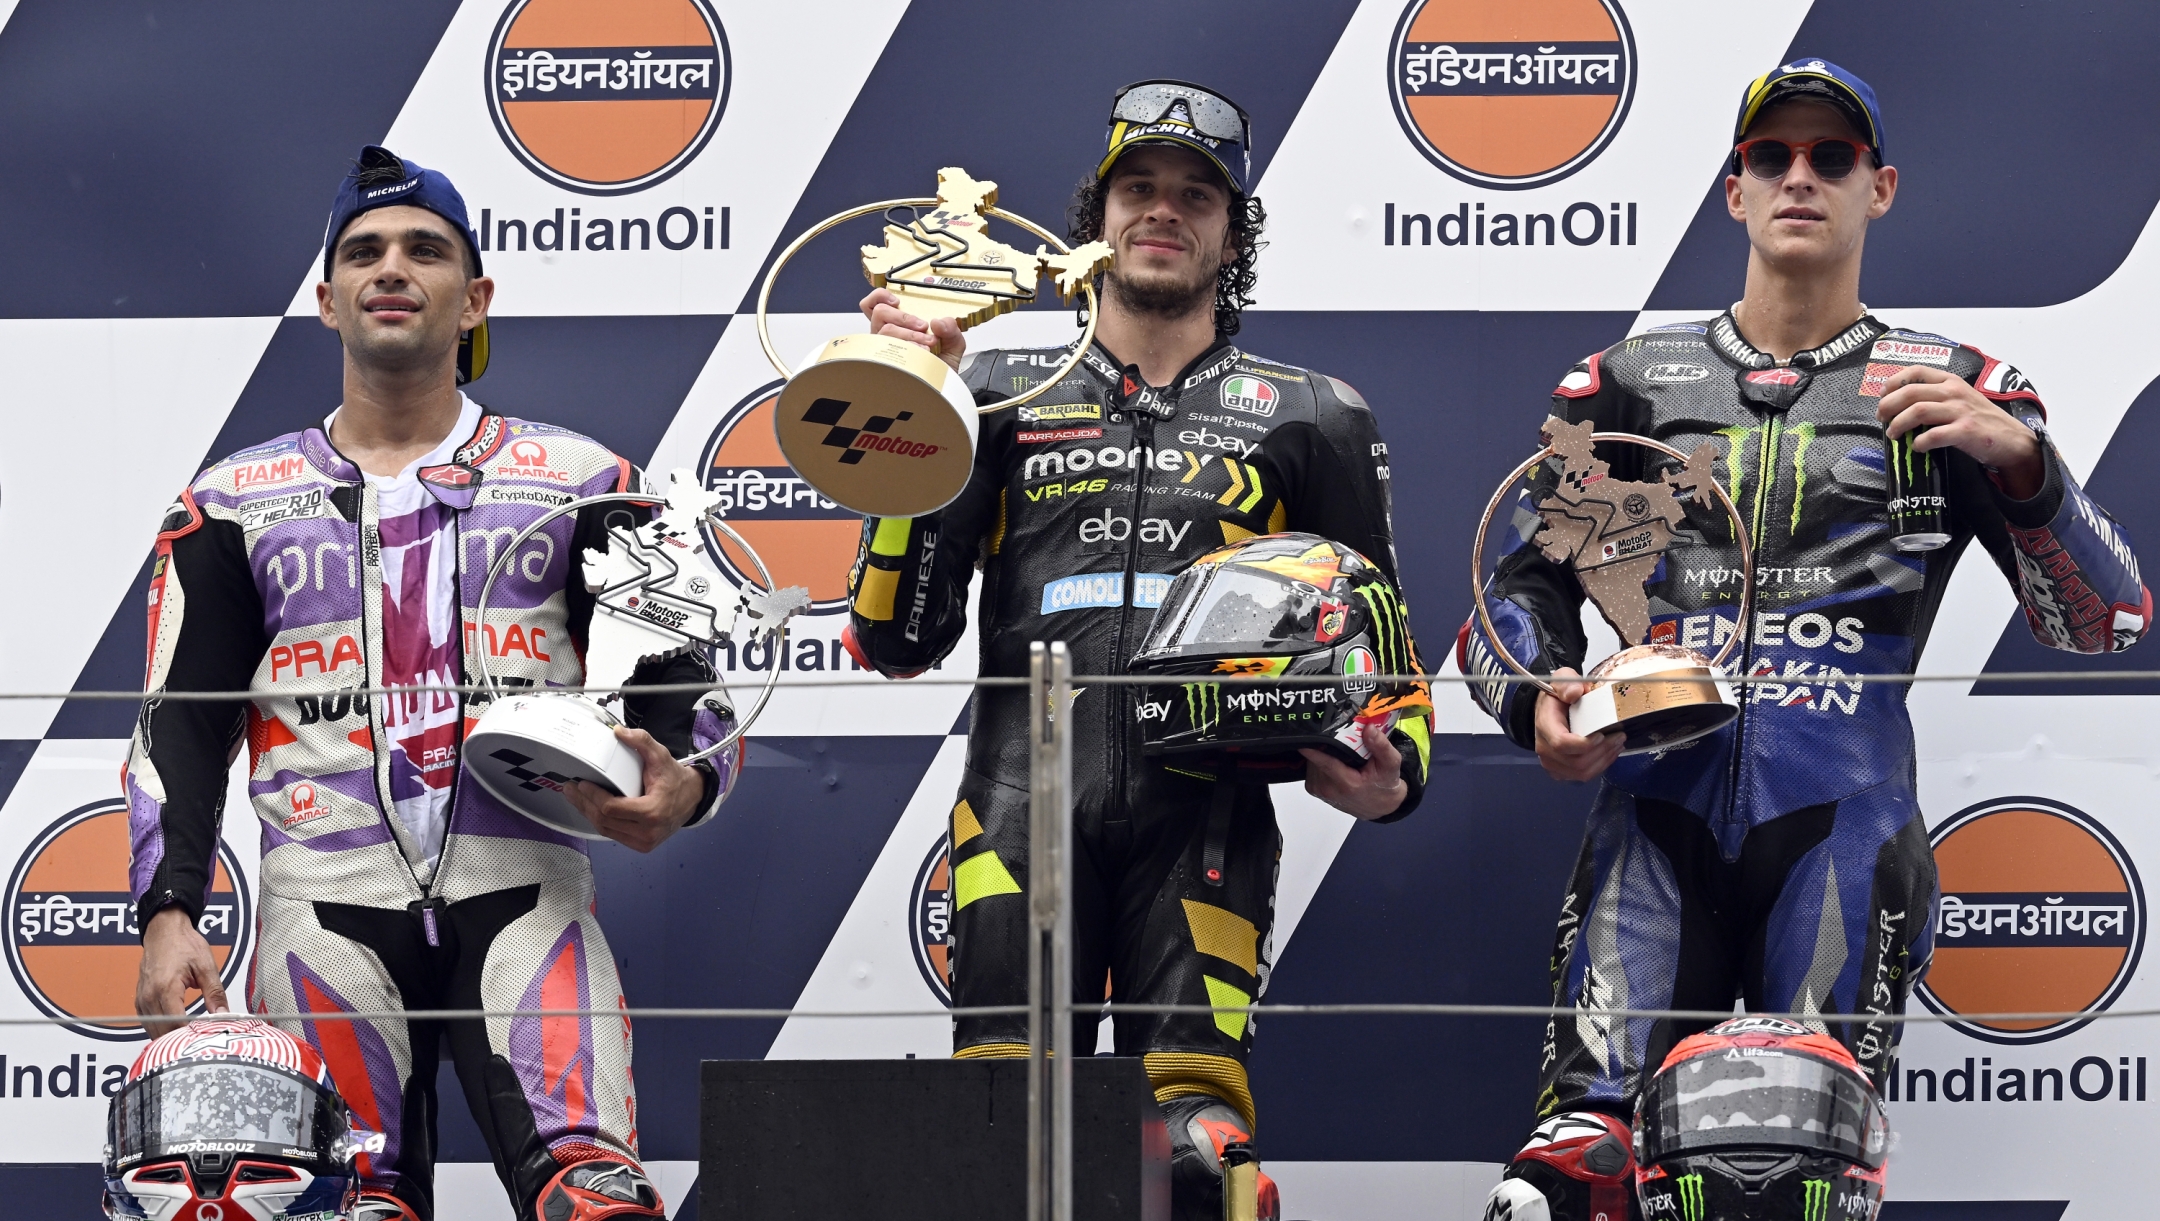 DELHI, INDIA - SEPTEMBER 24: Jorge Martin of Spain and Prima Pramac Racing team (L, second place), Marco Bezzecchi of Italy and  Mooney VR46 Racing Team (C, First place) and Fabio Quartararo of France and Monster Energy Yamaha team (R, third place) pose for media on podium after MotoGP race of the Indian MotoGP Grand Prix at the Buddh International Circuit in Greater Noida on the outskirts of New Delhi, on September 24, 2023. (Photo by Prakash Singh/Getty Images)